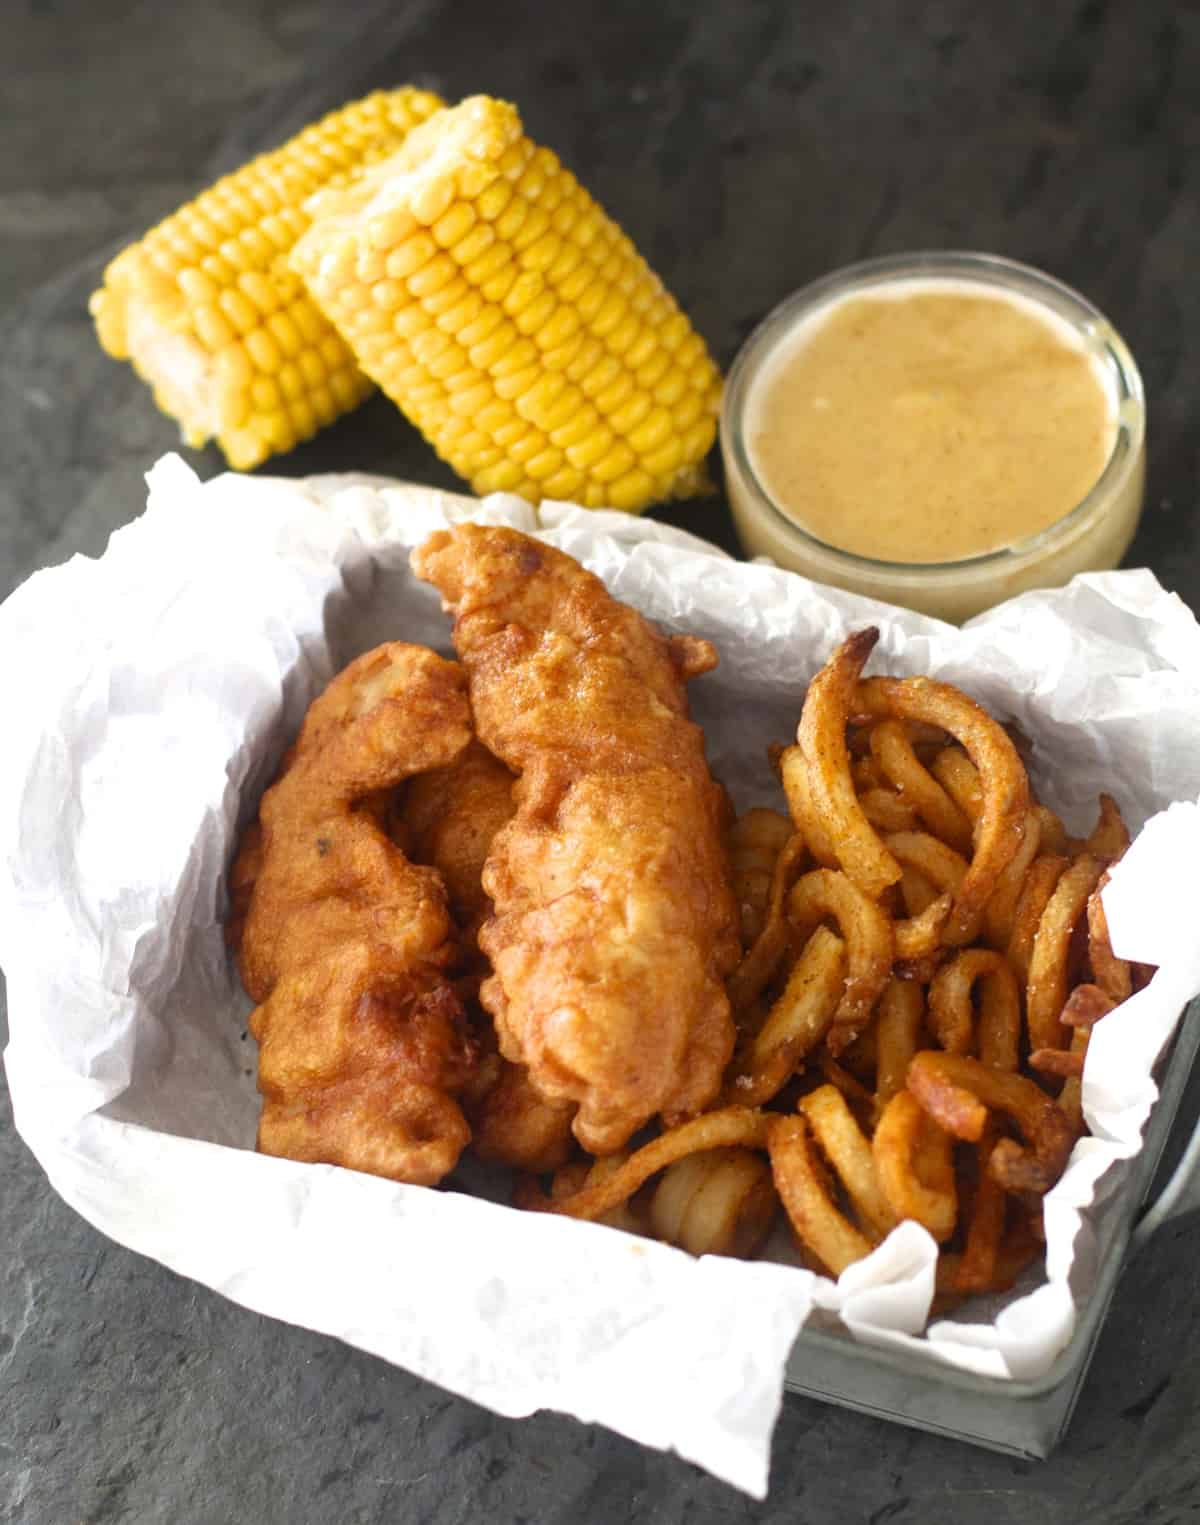 chili's chicken crispers served in a basket next to curly fries and corn on the cob